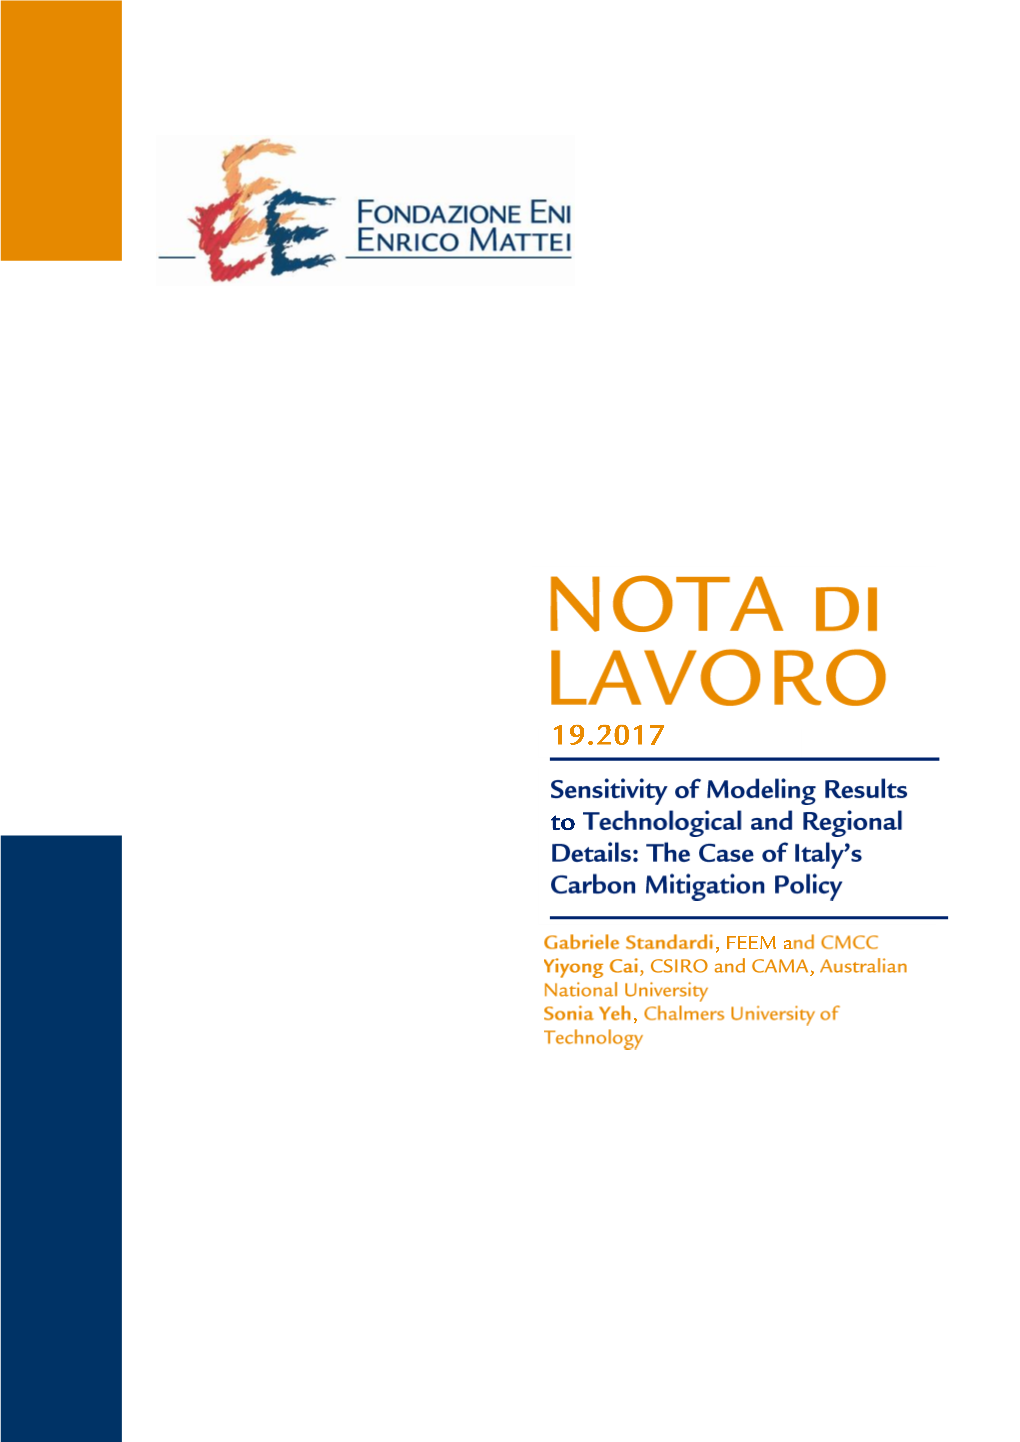 The Case of Italy's Carbon Mitigation Policy